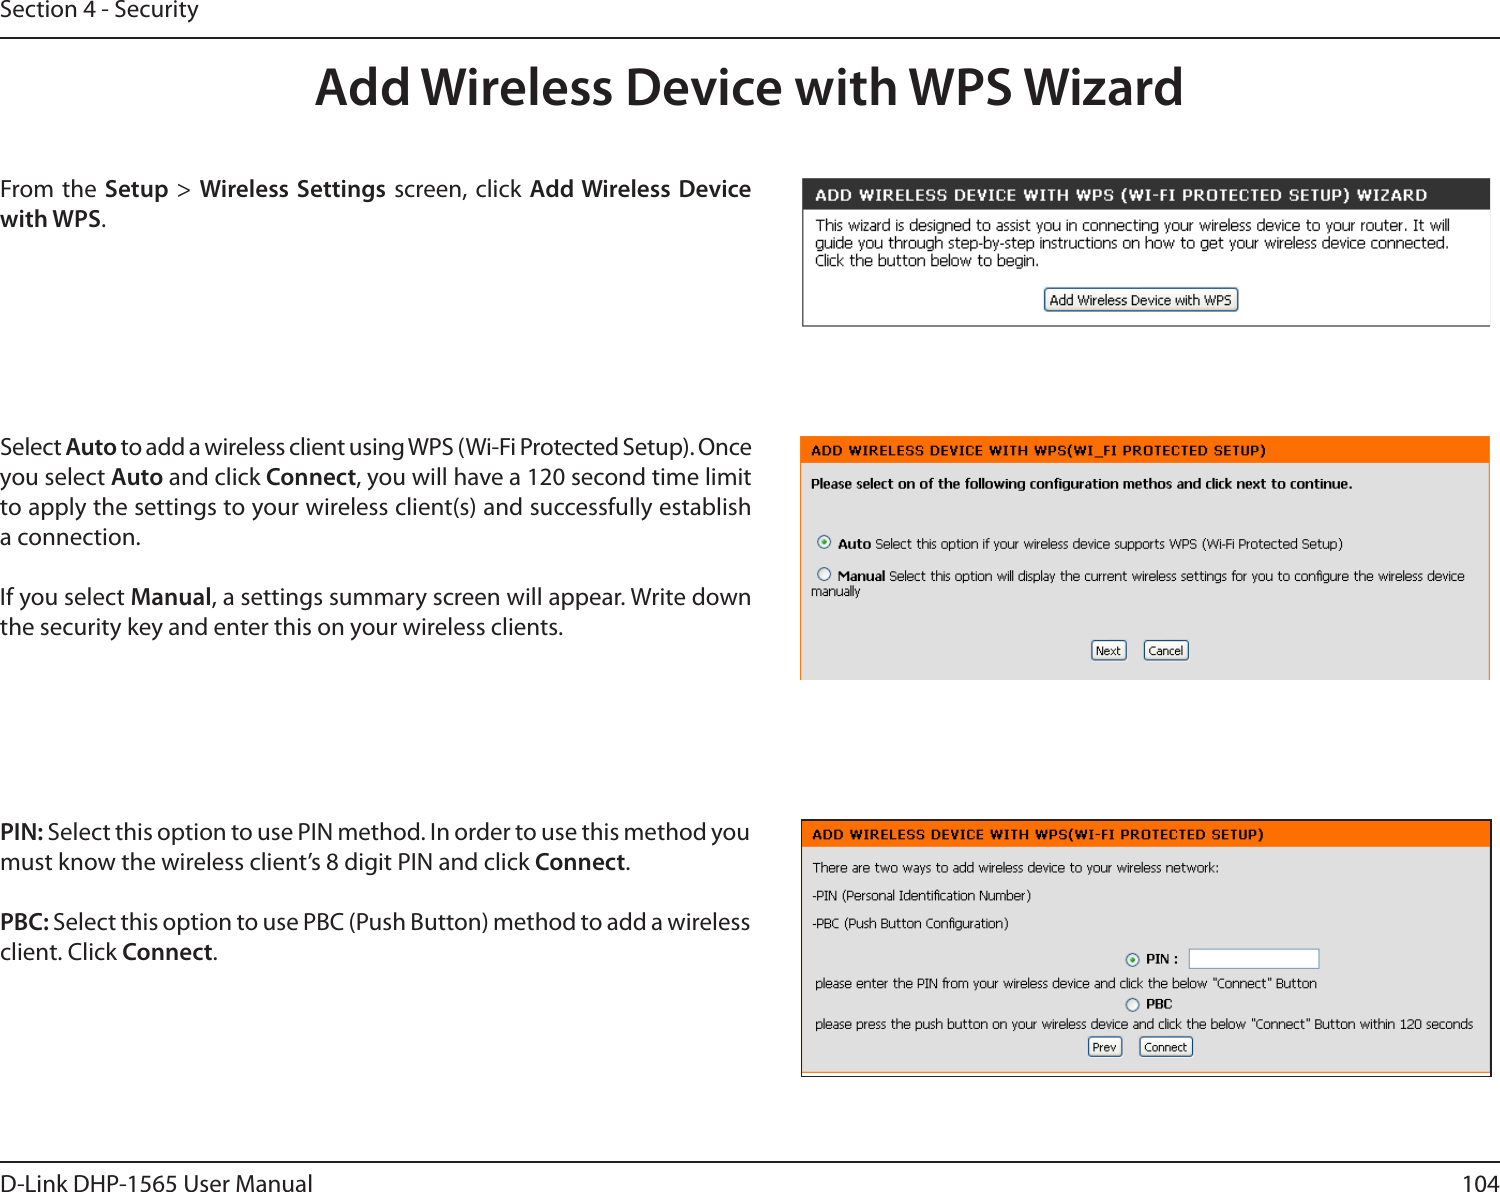 104D-Link DHP-1565 User ManualSection 4 - SecurityFrom the Setup &gt; Wireless Settings screen, click Add Wireless Device with WPS.Add Wireless Device with WPS WizardPIN: Select this option to use PIN method. In order to use this method you must know the wireless client’s 8 digit PIN and click Connect.PBC: Select this option to use PBC (Push Button) method to add a wireless client. Click Connect.Select Auto to add a wireless client using WPS (Wi-Fi Protected Setup). Once you select Auto and click Connect, you will have a 120 second time limit to apply the settings to your wireless client(s) and successfully establish a connection. If you select Manual, a settings summary screen will appear. Write down the security key and enter this on your wireless clients. 